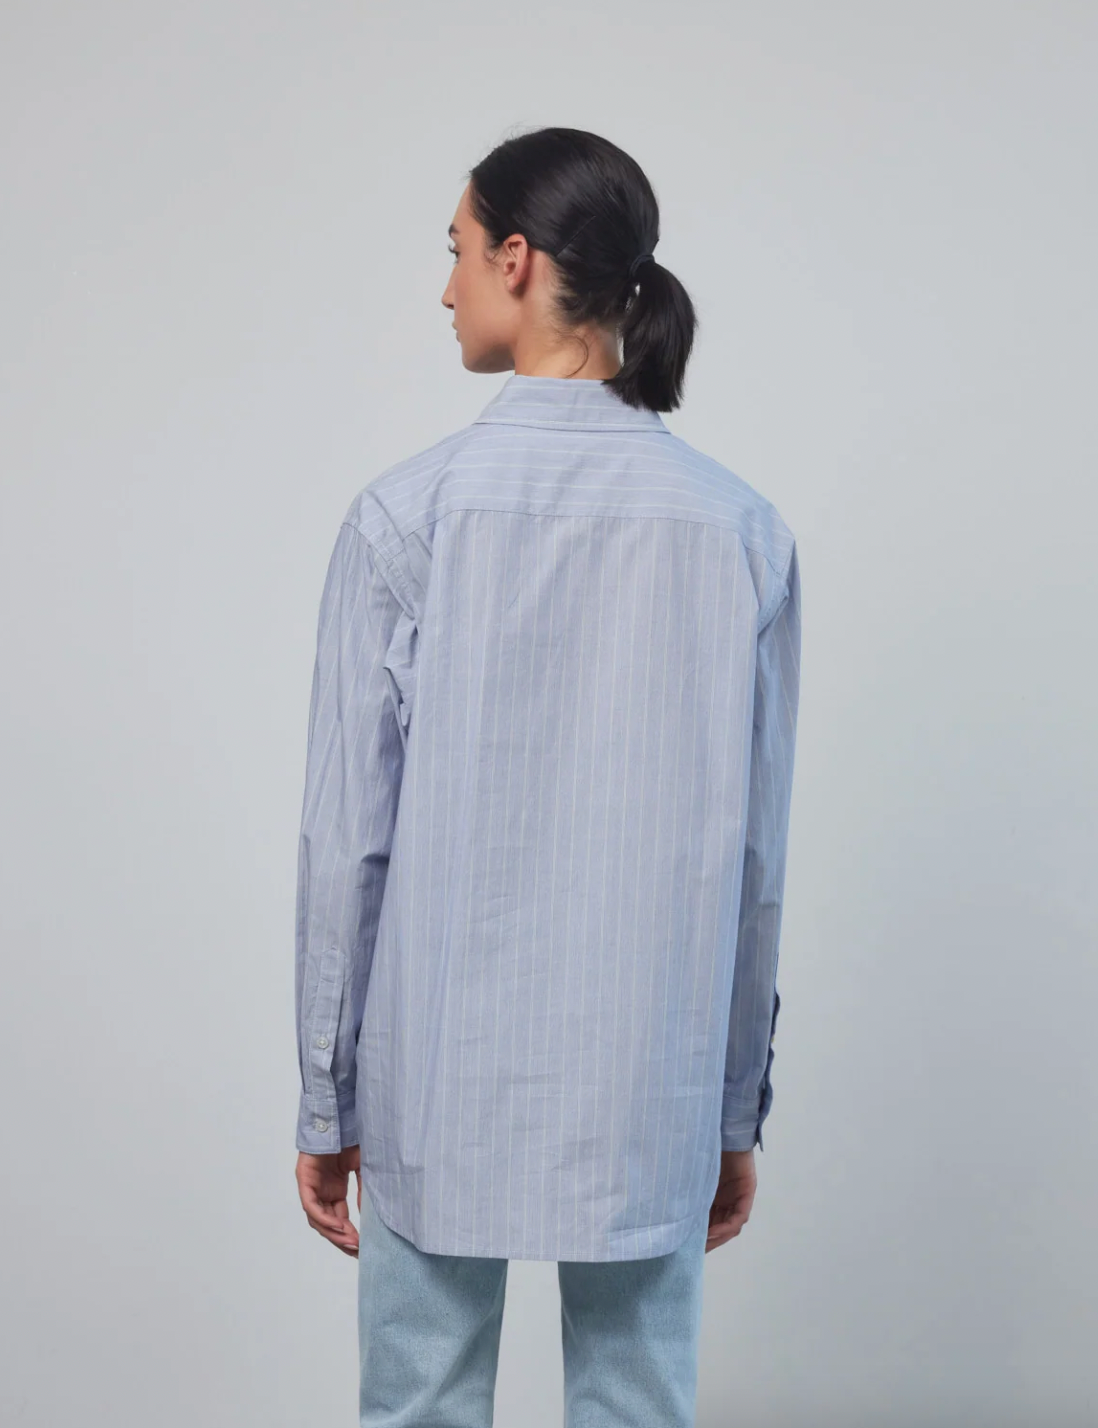 Product Image for Nolan Shirt, Striped Primary Blue